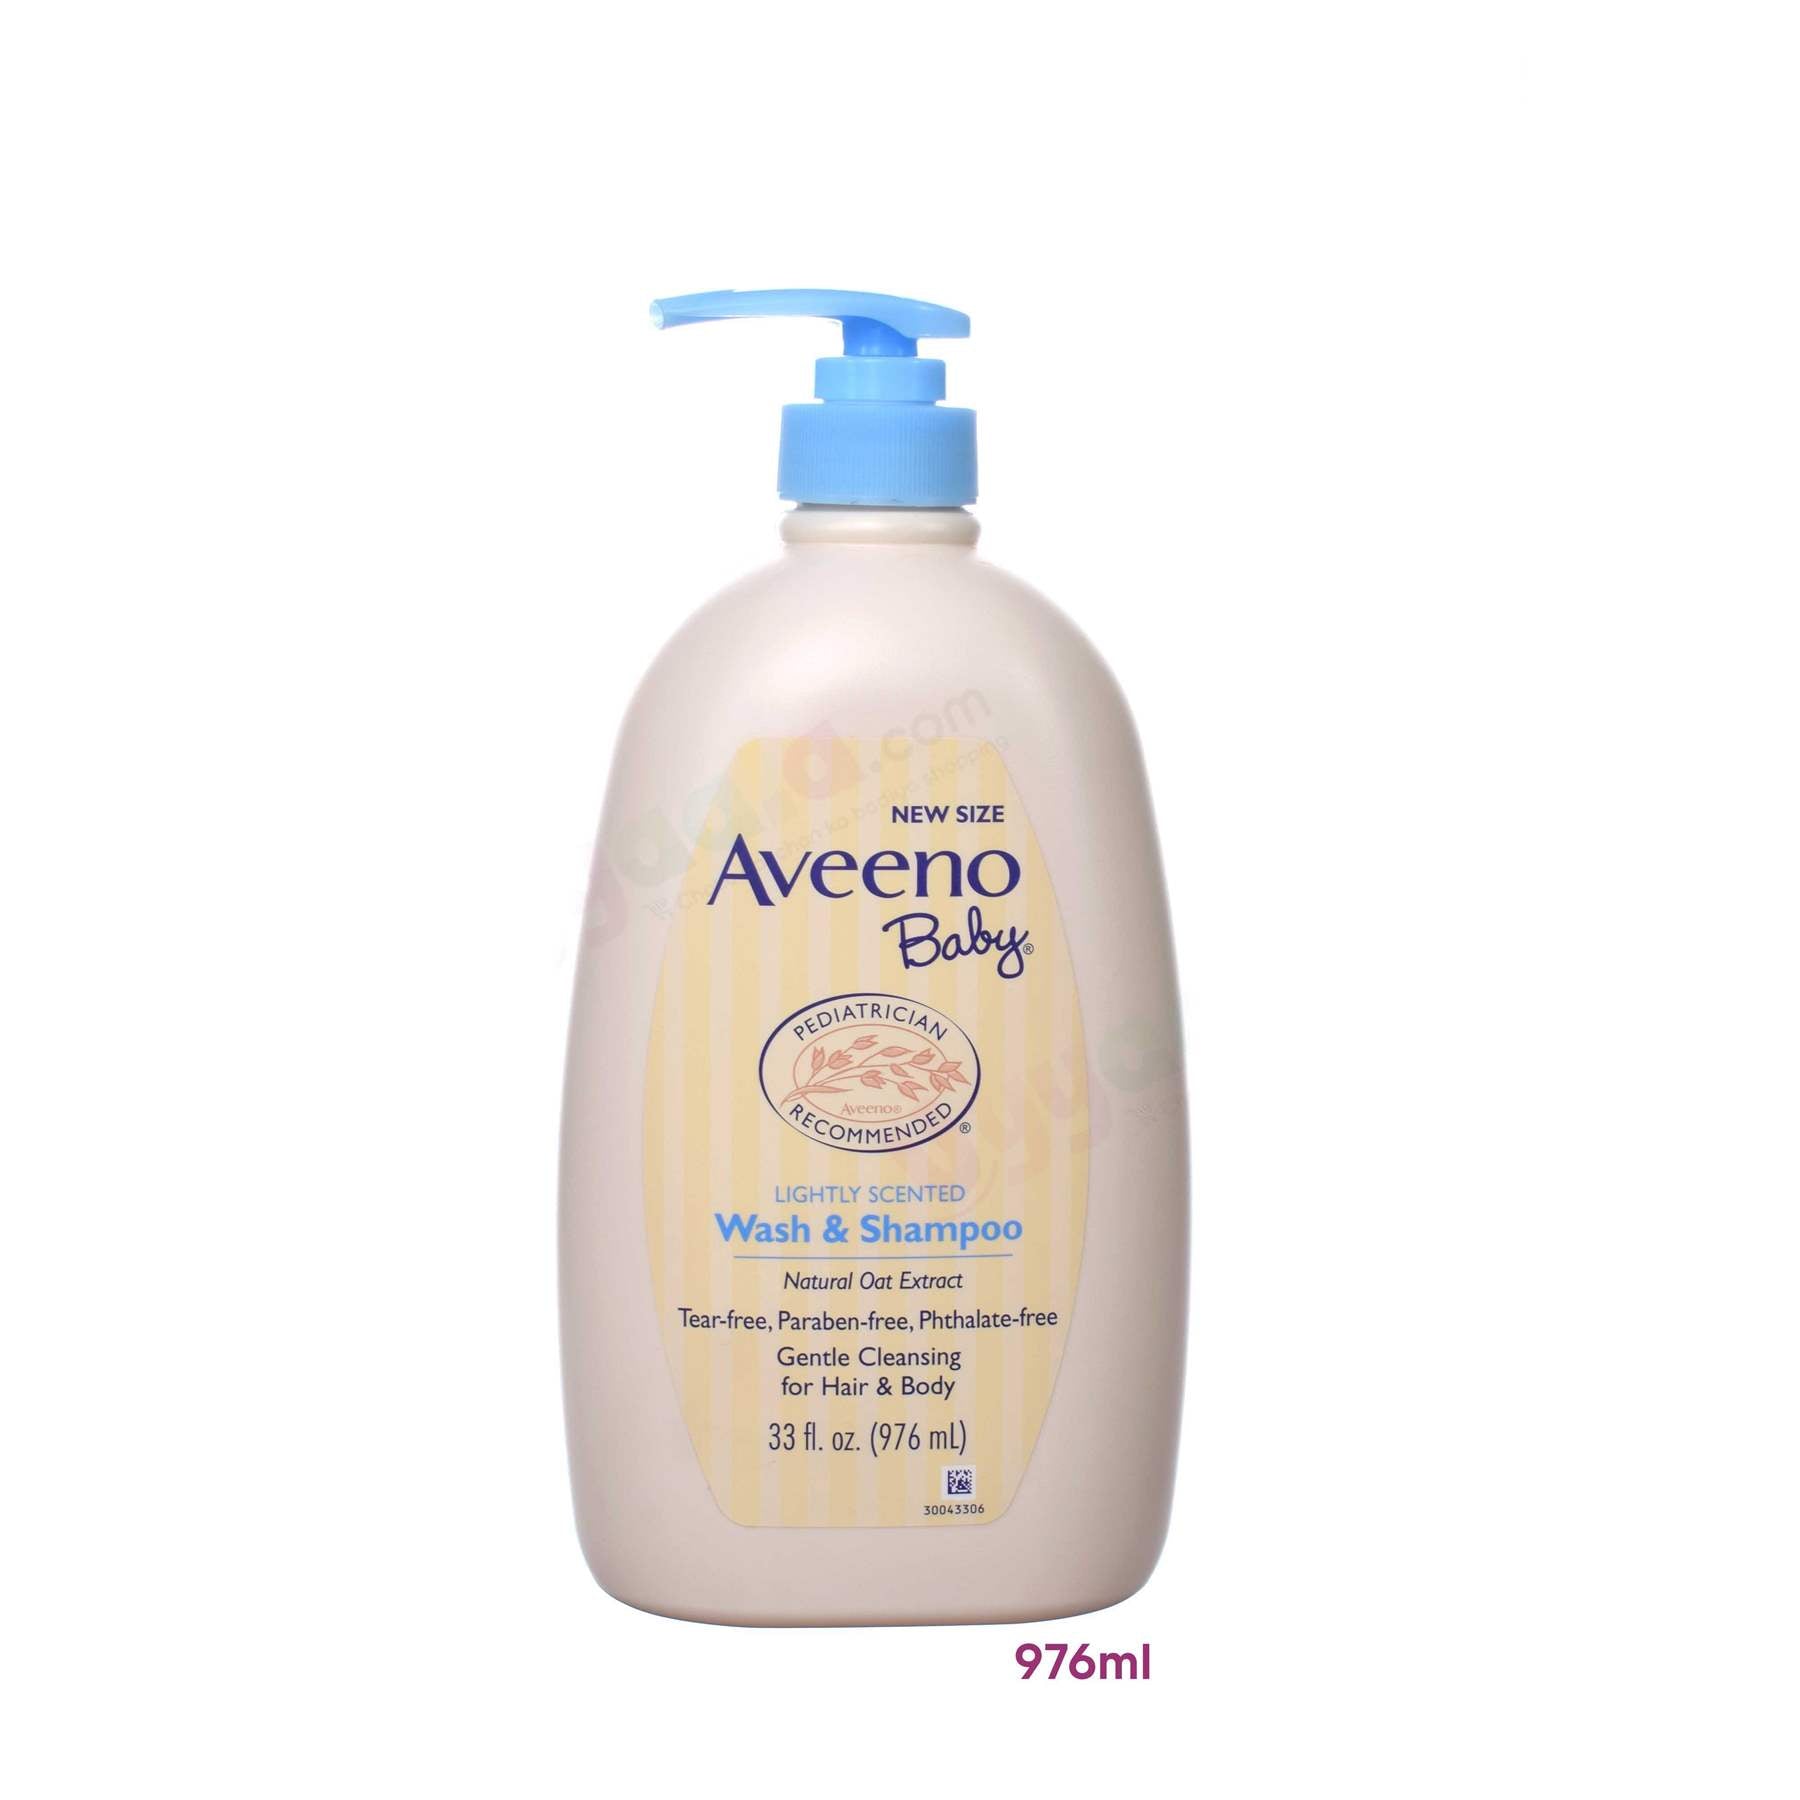 AVEENO BABY Wash & shampoo, natural oat extract - lightly scented, 976ml